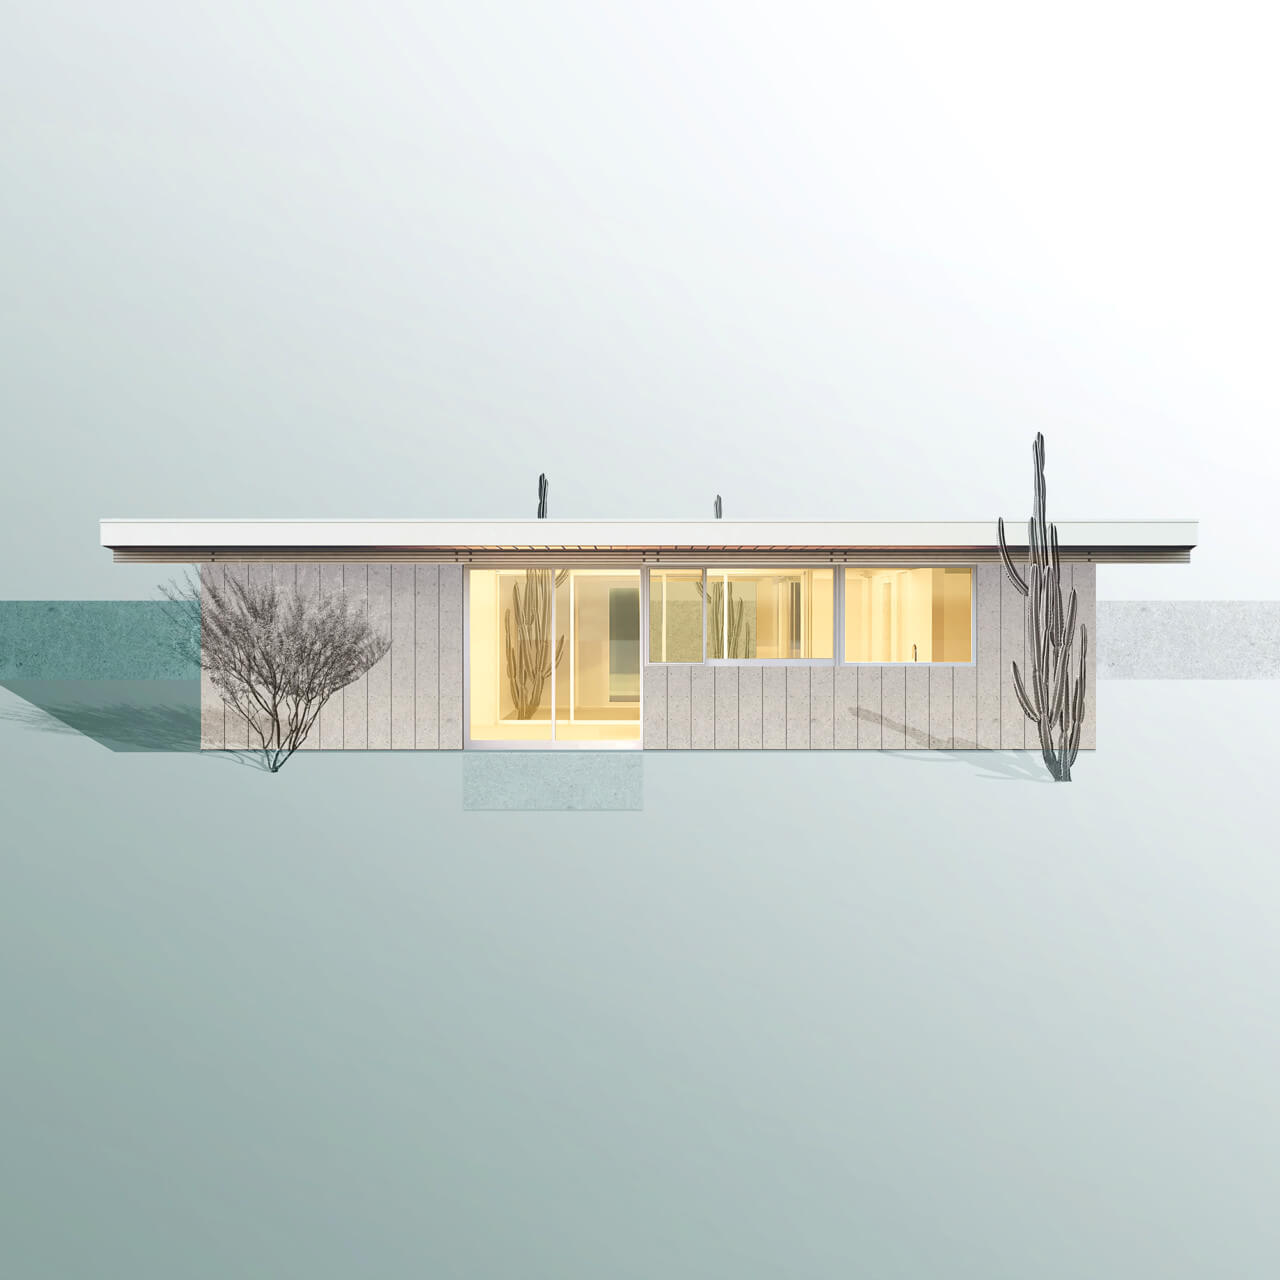 rendering depicting an exterior of an unbuilt accessory dwelling unit with cactus in the foreground